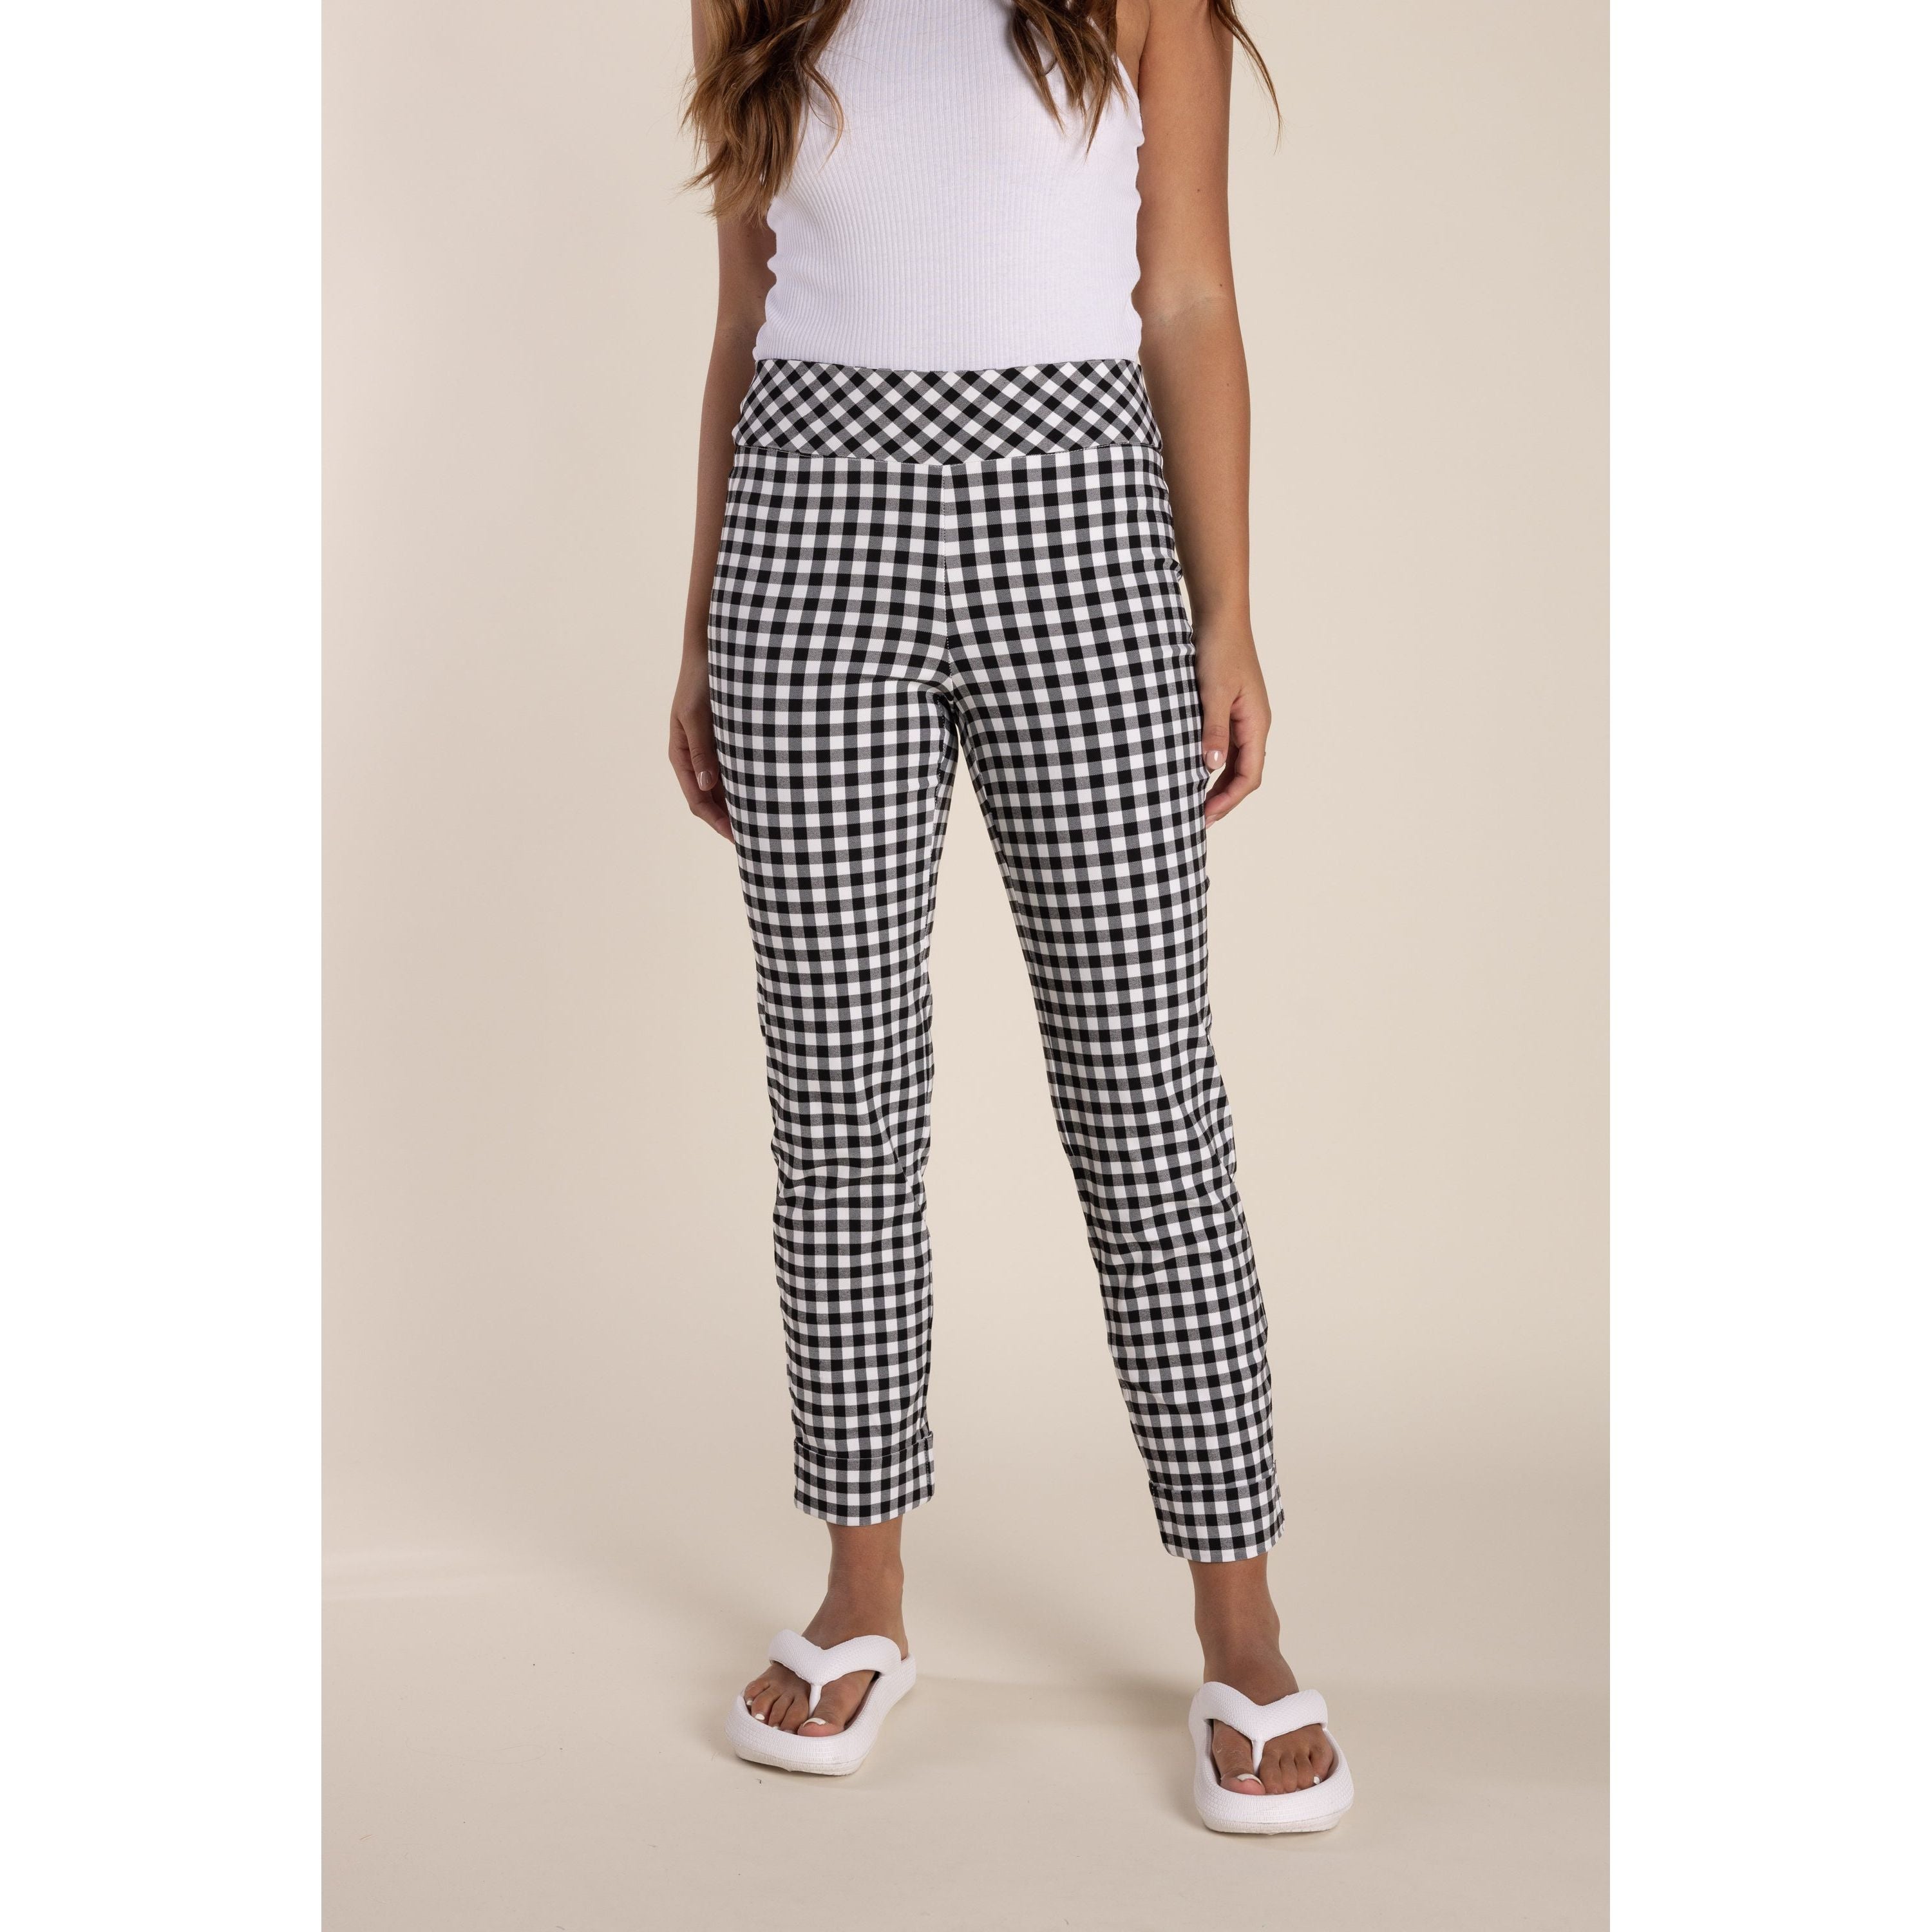 Two T's - Pull On Gingham Pant Black